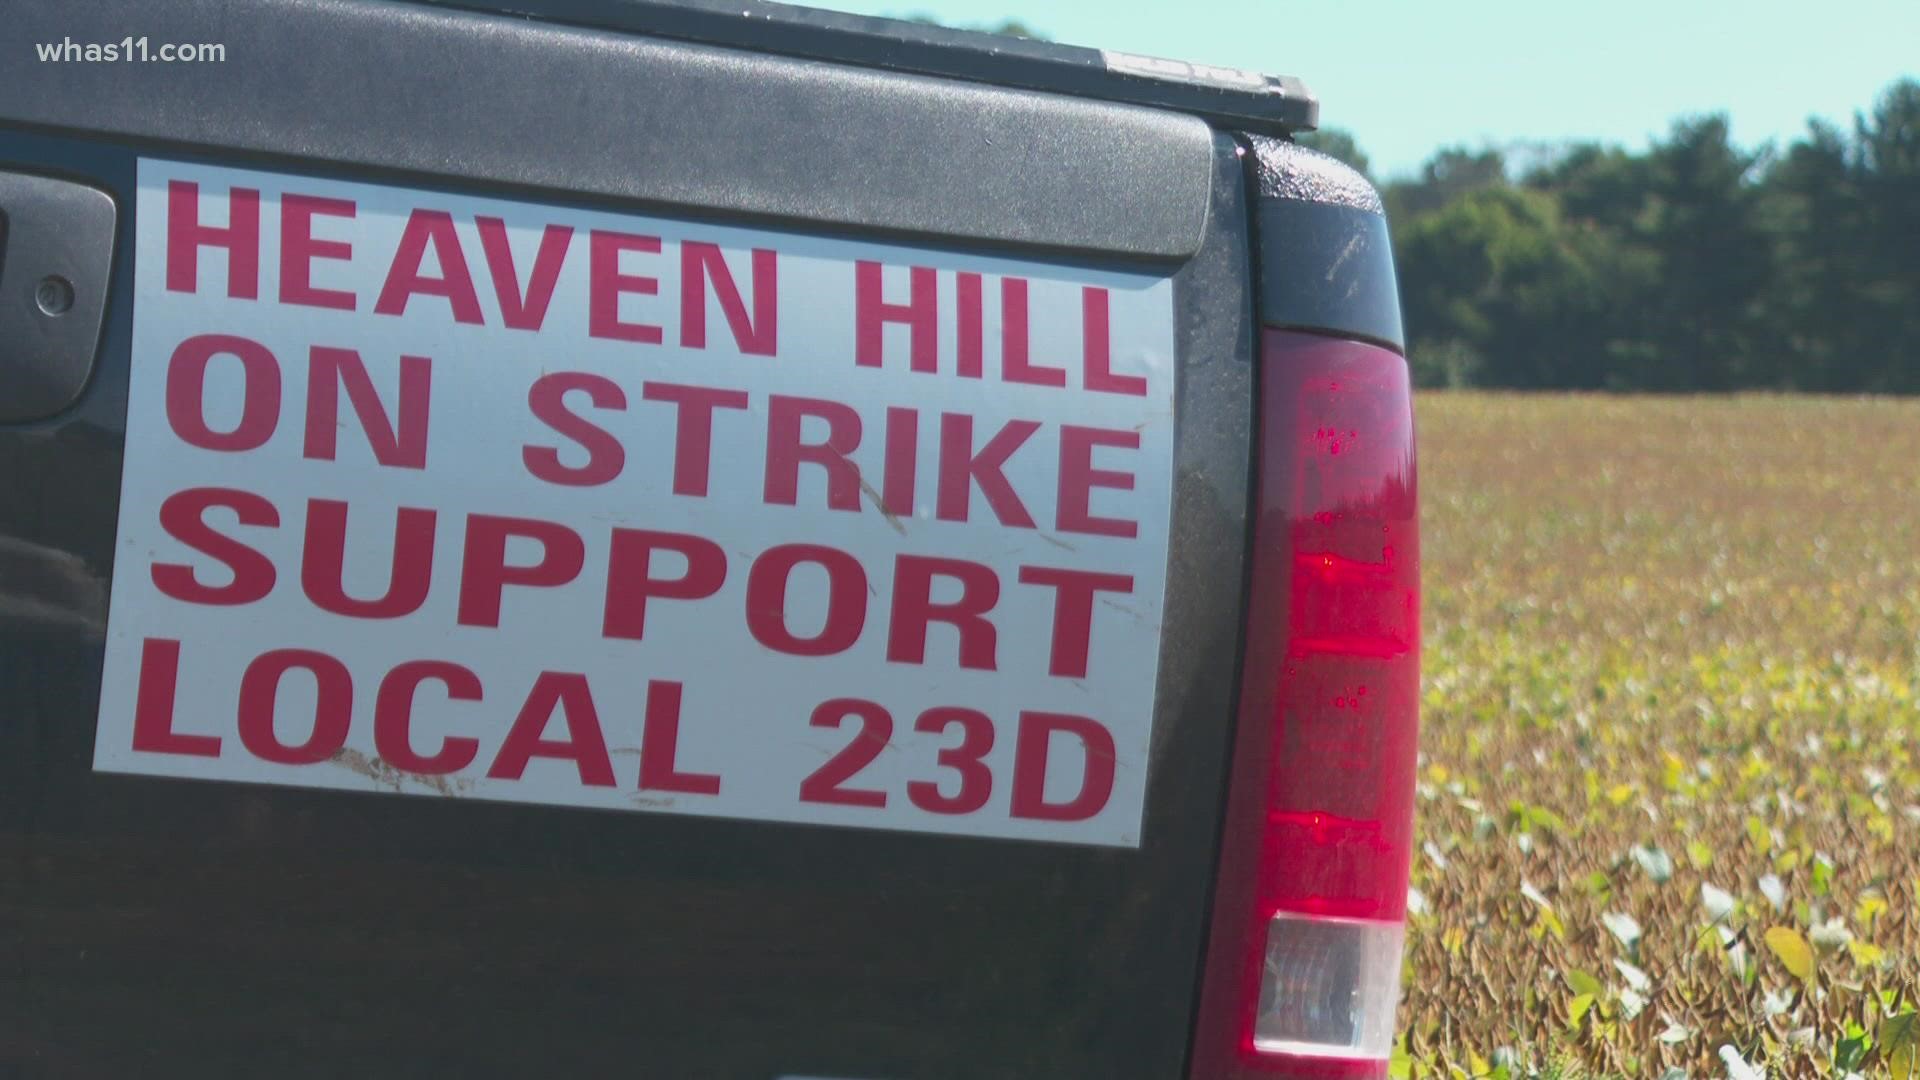 After 6 weeks of strikes, Heaven Hill said they have reached an impasse with the union representing employees. Workers are still hoping for negotiations.